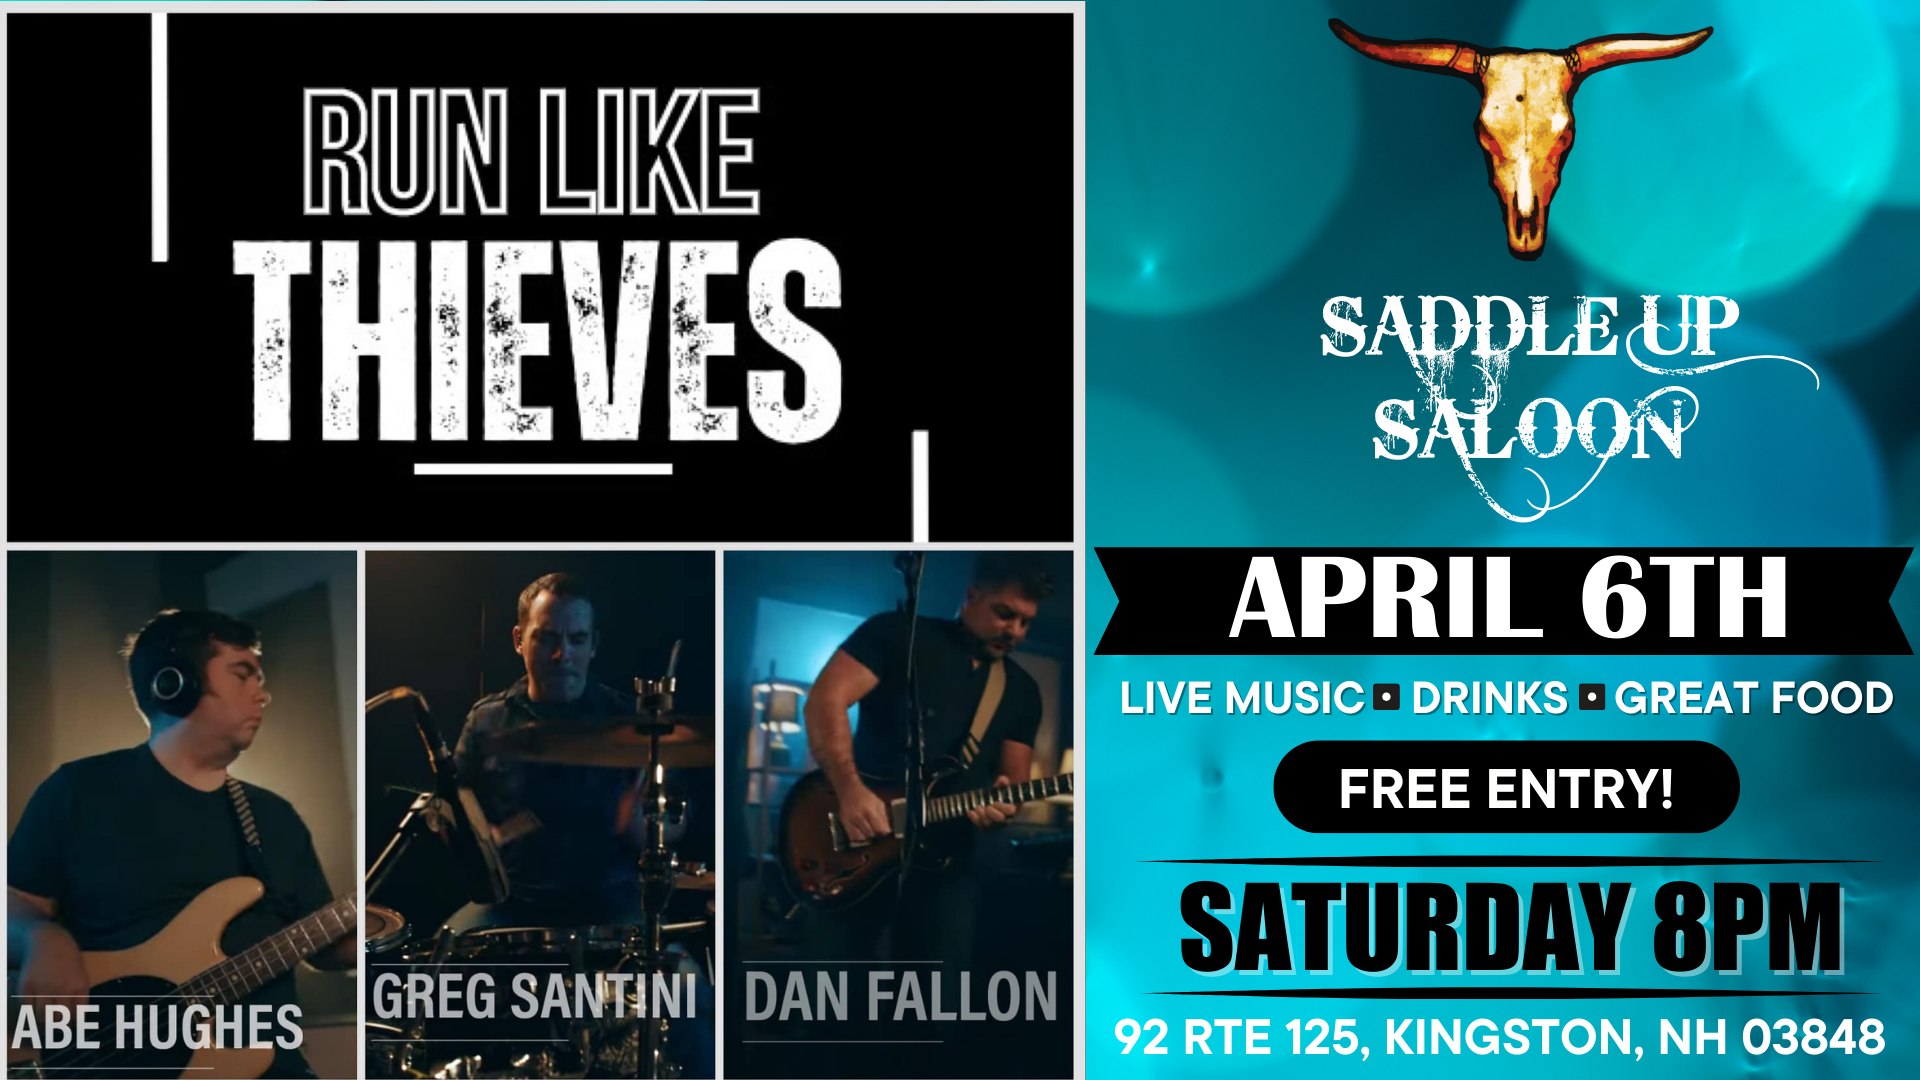 The Captivating Sound of Run Like Thieves - Saddle Up Saloon